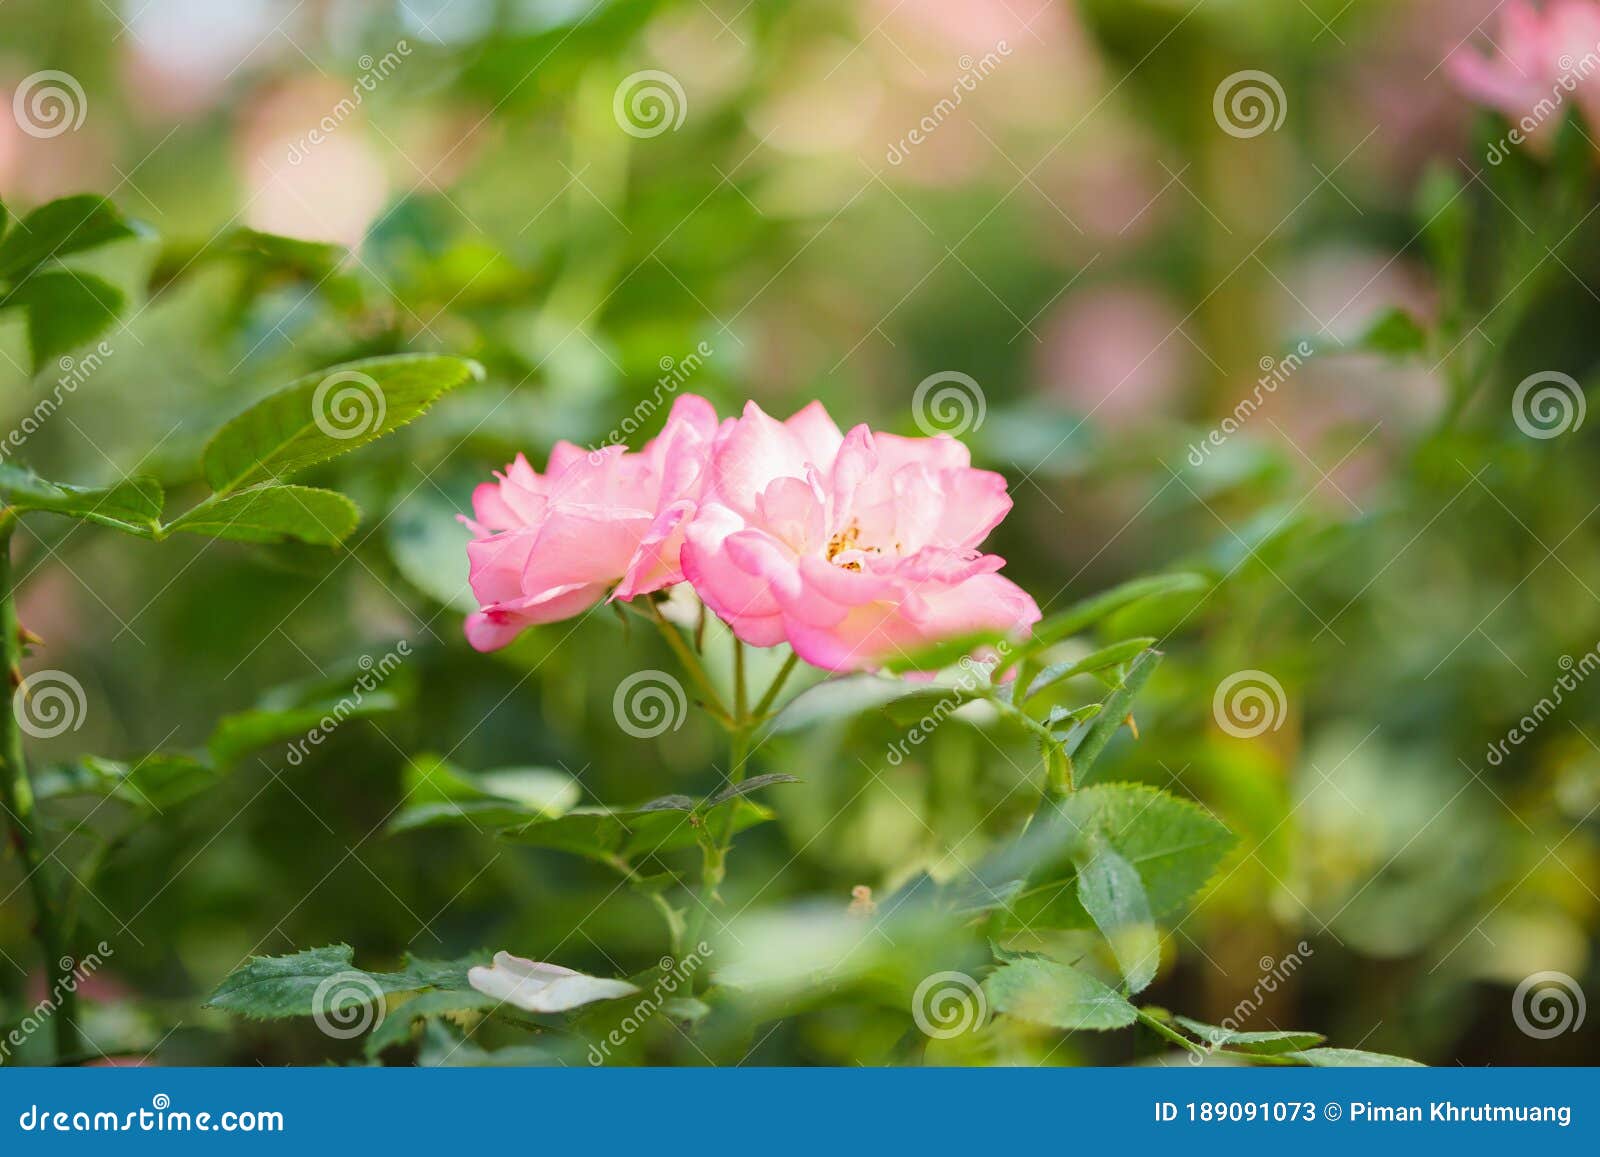 Beautiful Pink Roses Flower In The Garden Stock Image Image Of Bright